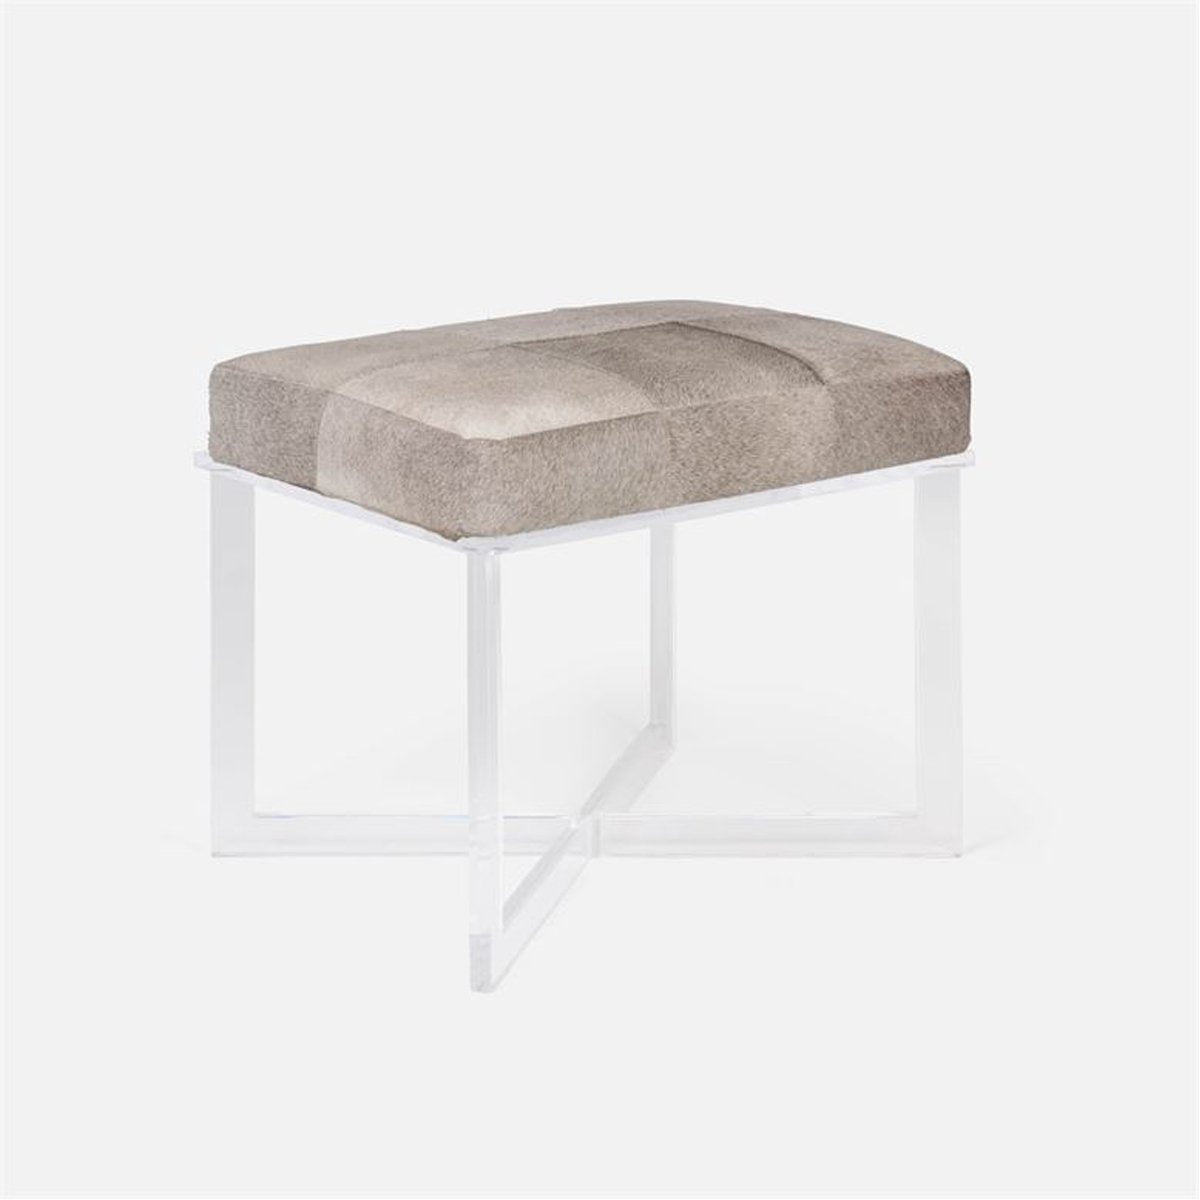 Made Goods Lex Clear Acrylic Single Bench in Bassac Shagreen Leather